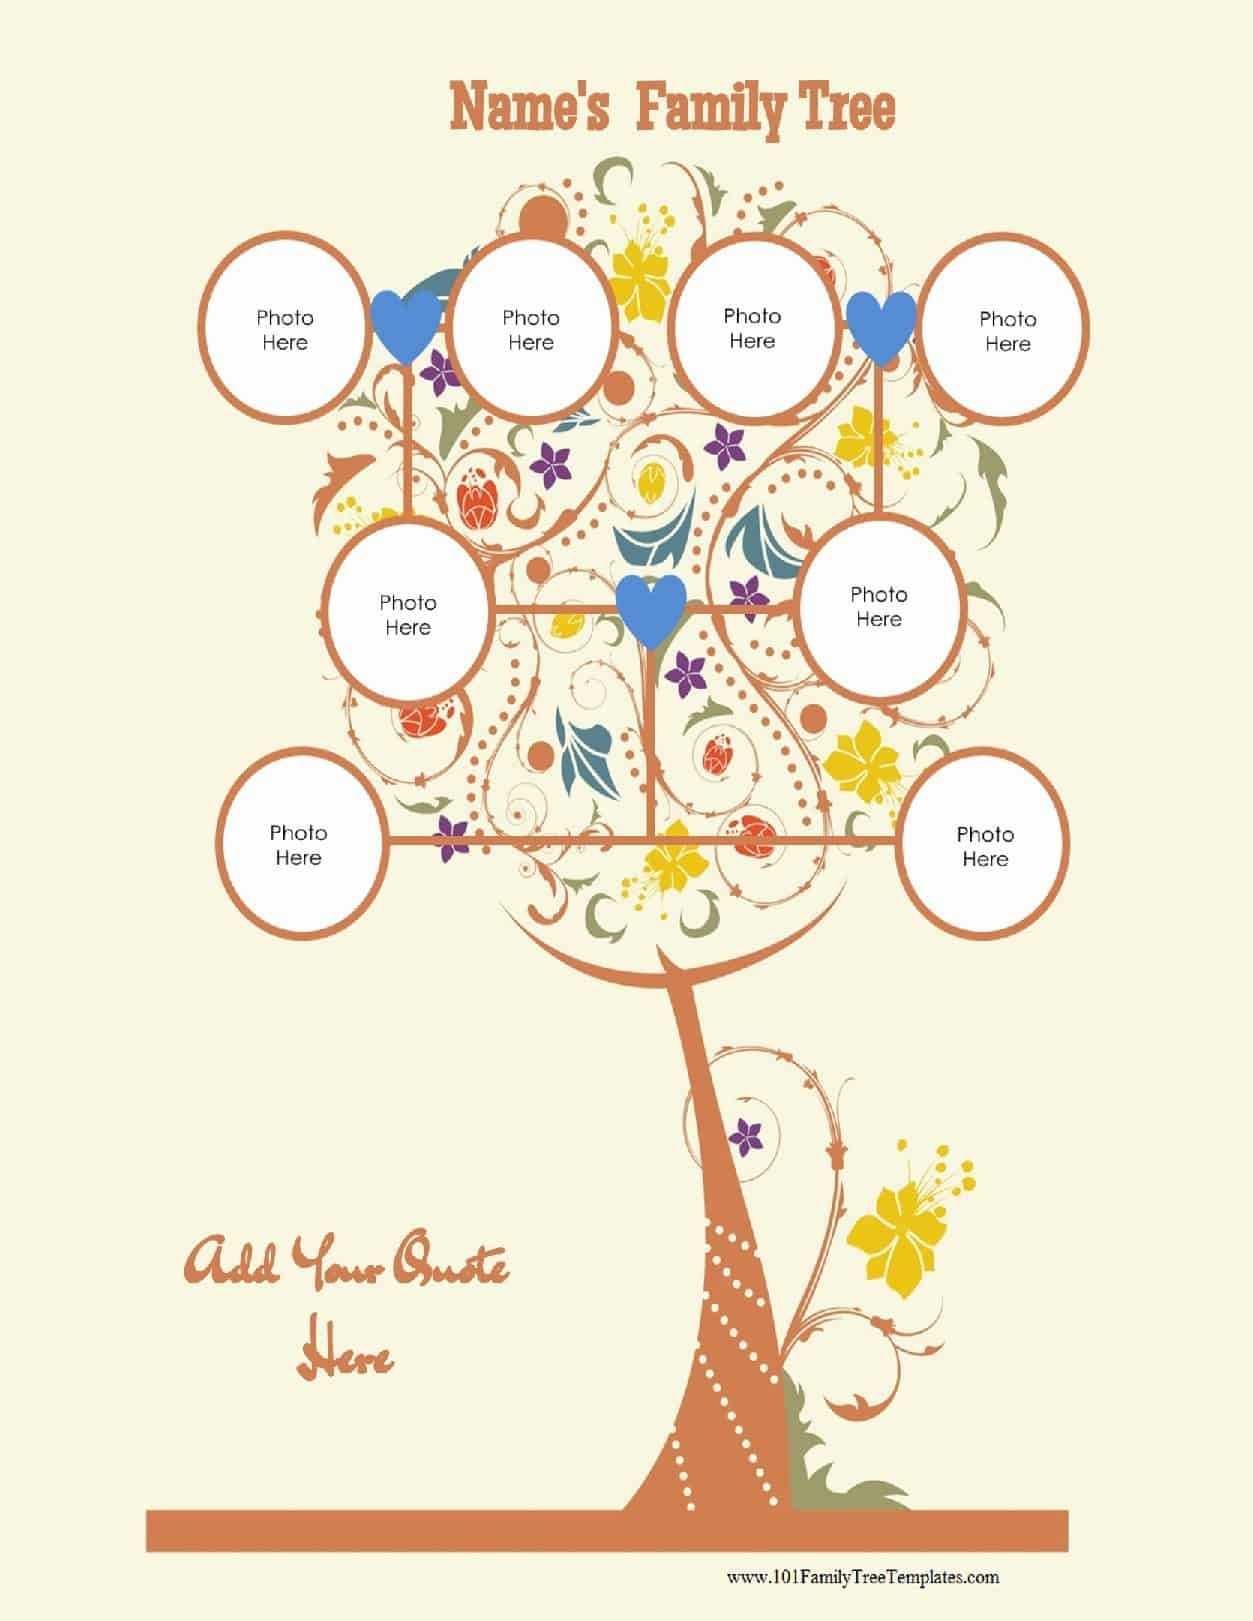 3 Generation Family Tree Generator | All Templates Are Free Throughout Blank Family Tree Template 3 Generations